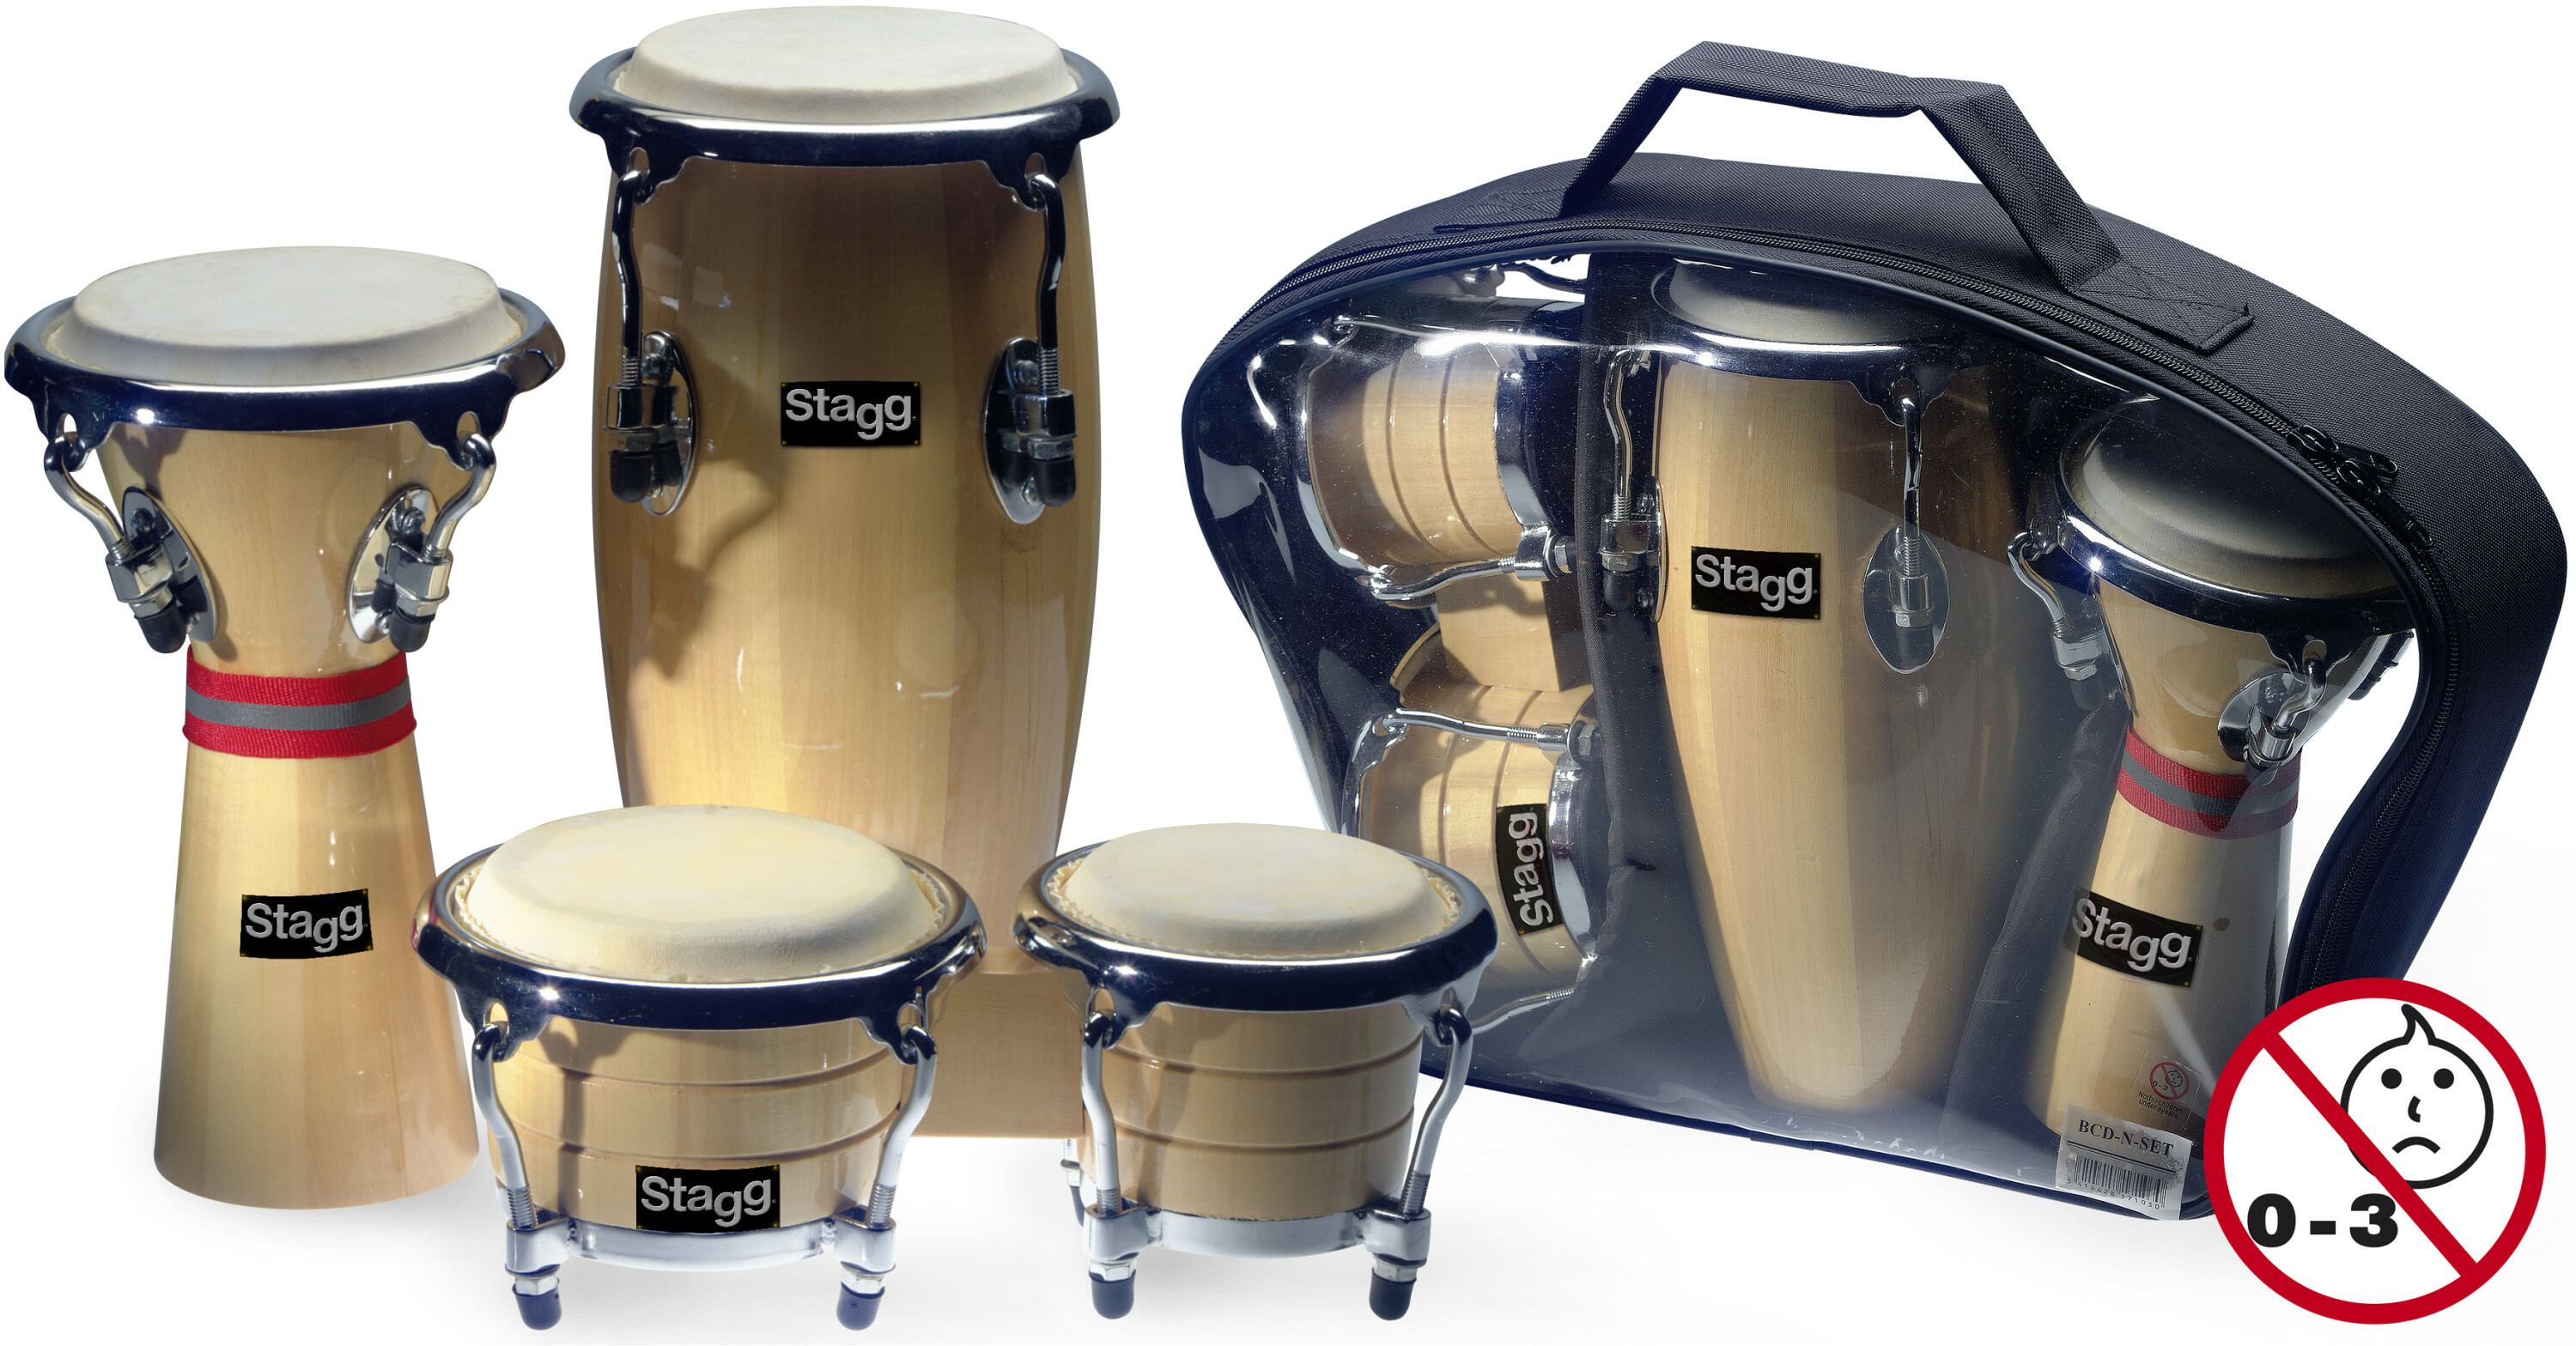 Stagg Bcd N Set - Percussion set for kids - Main picture